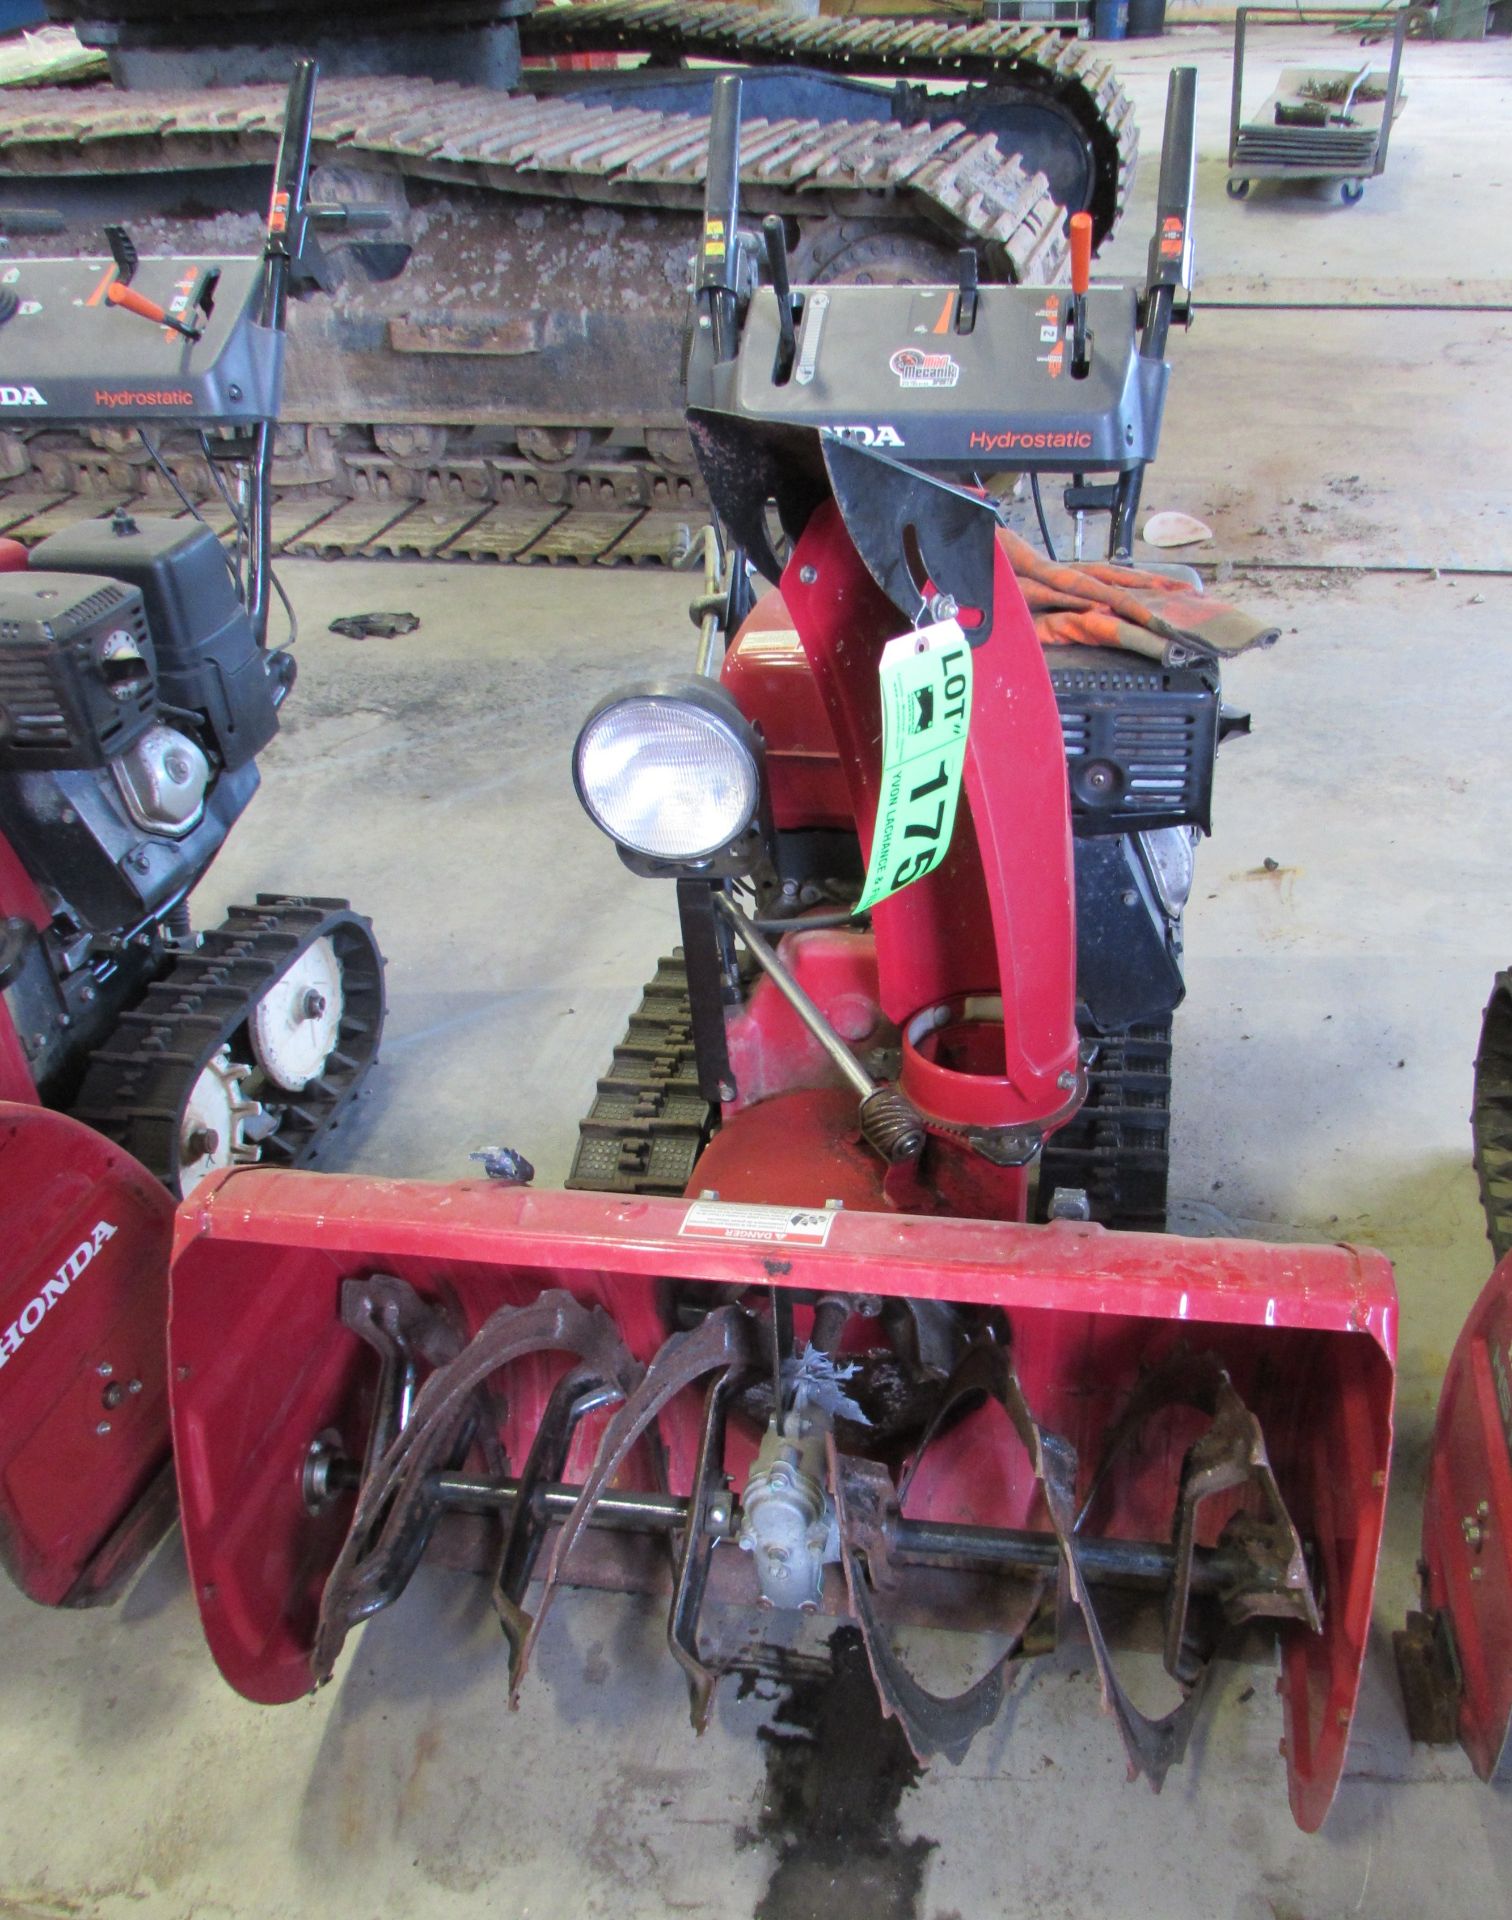 2012 HONDA HSS1332 TRACK SNOWBLOWER C/W 31.9" CLEARING WIDTH, 21.7" CLEARING HEIGHT, 198 DEGREE